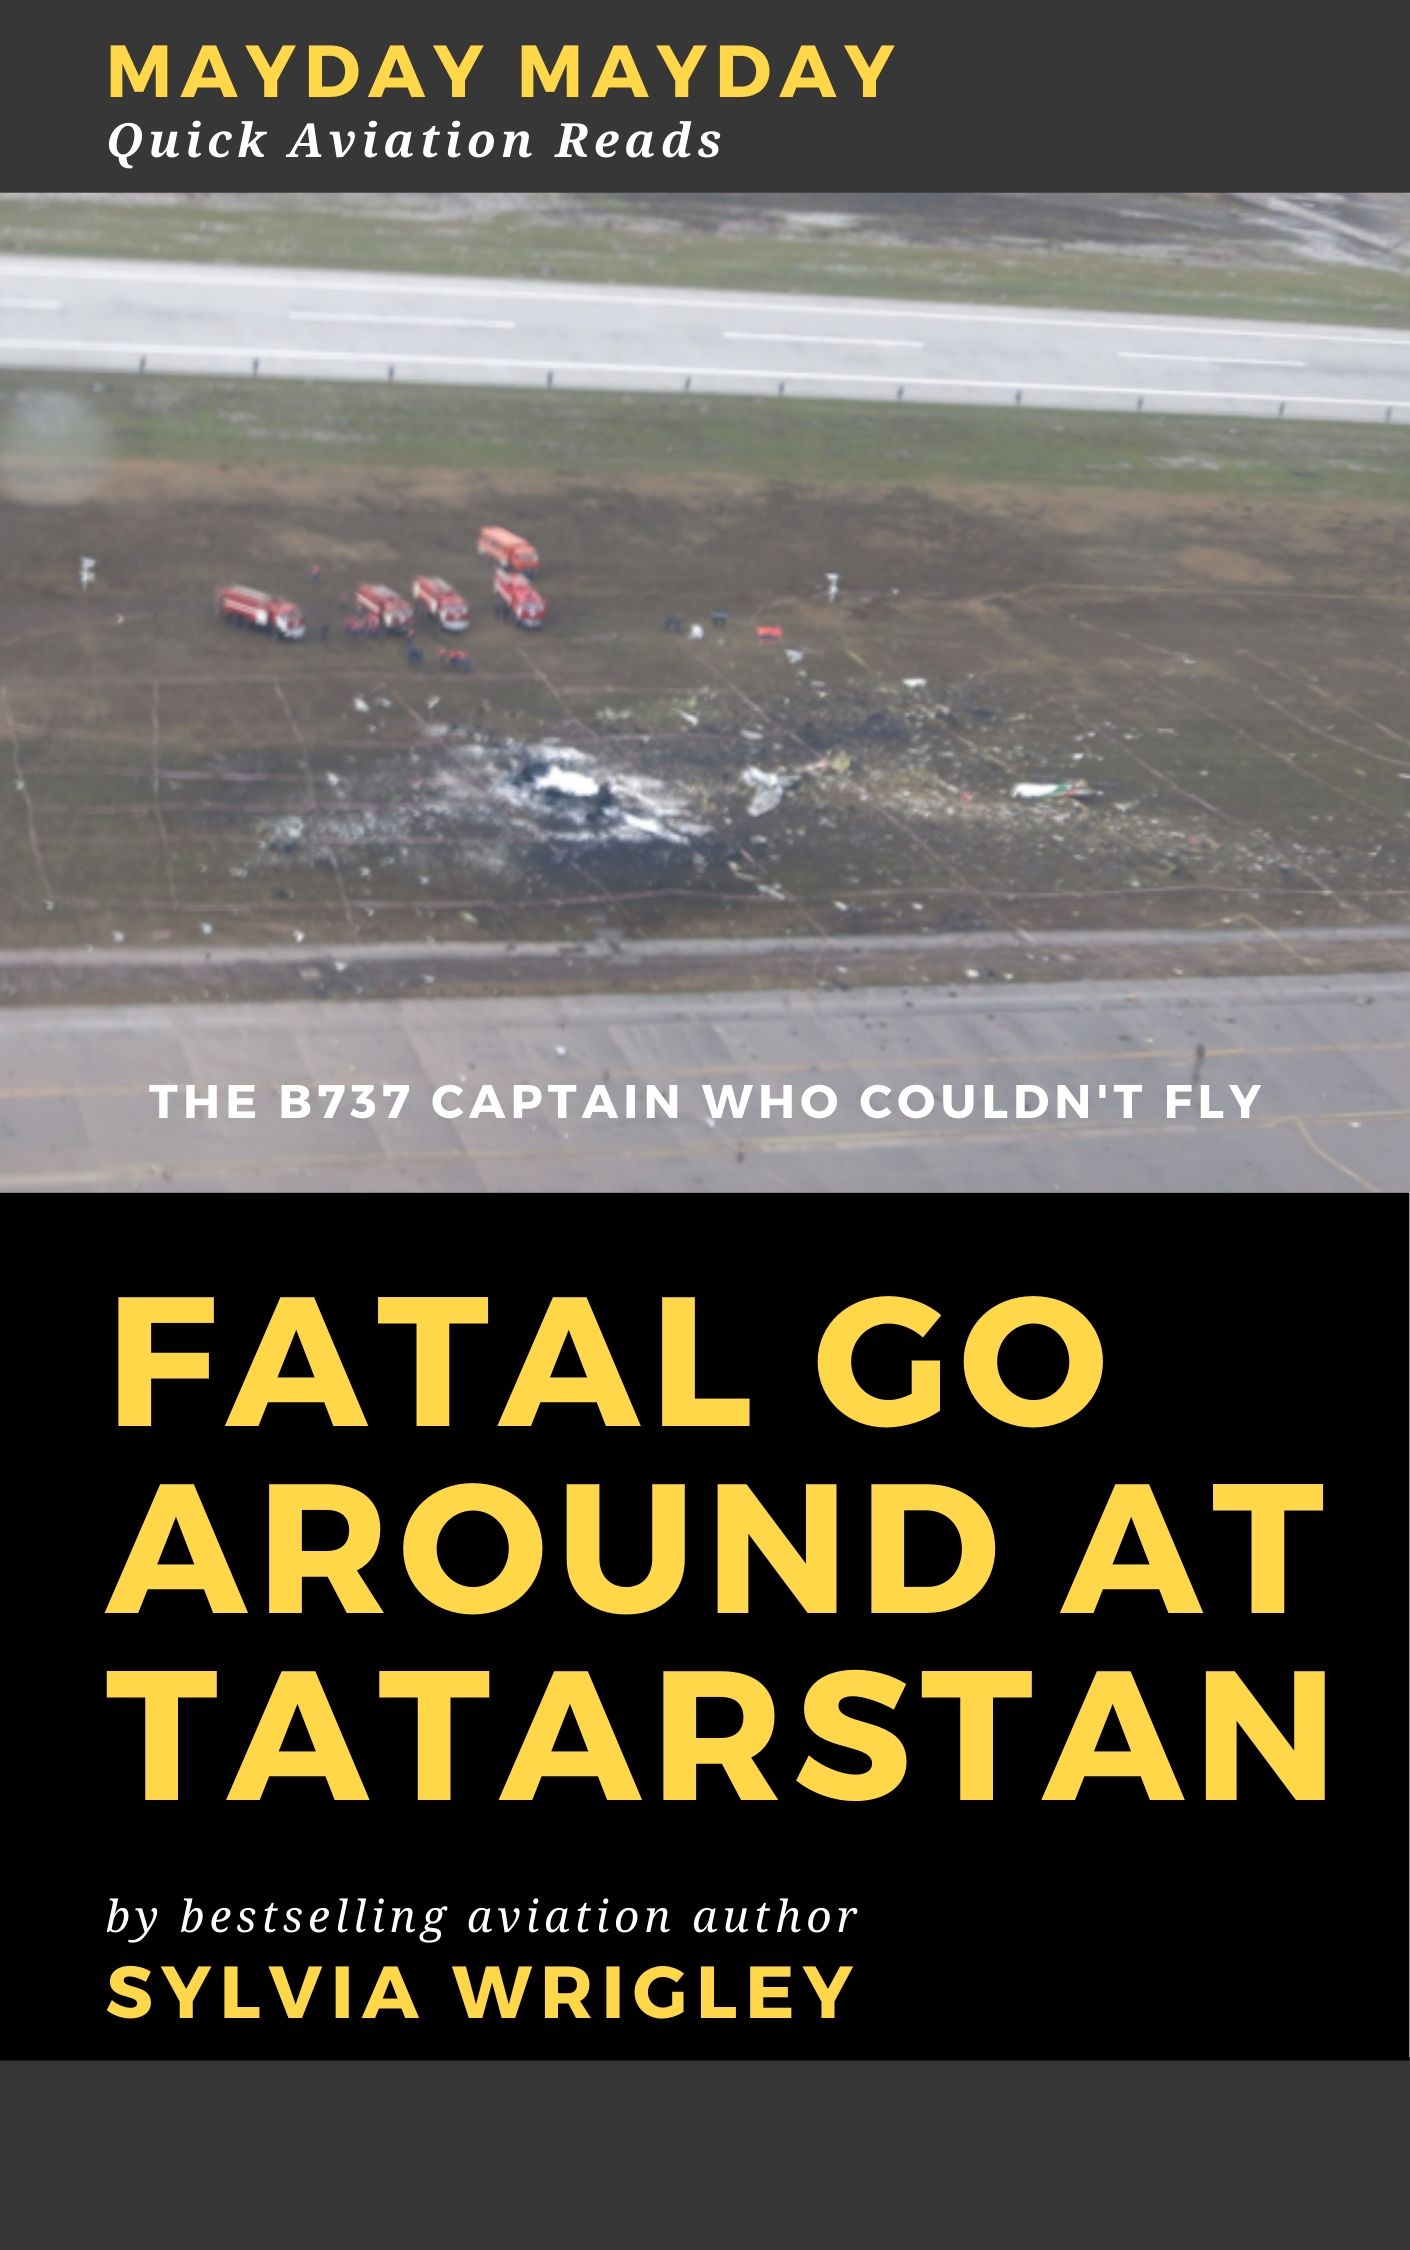 Fatal Go Around at Tatarstan: The B737 Captain Who Couldn't Fly